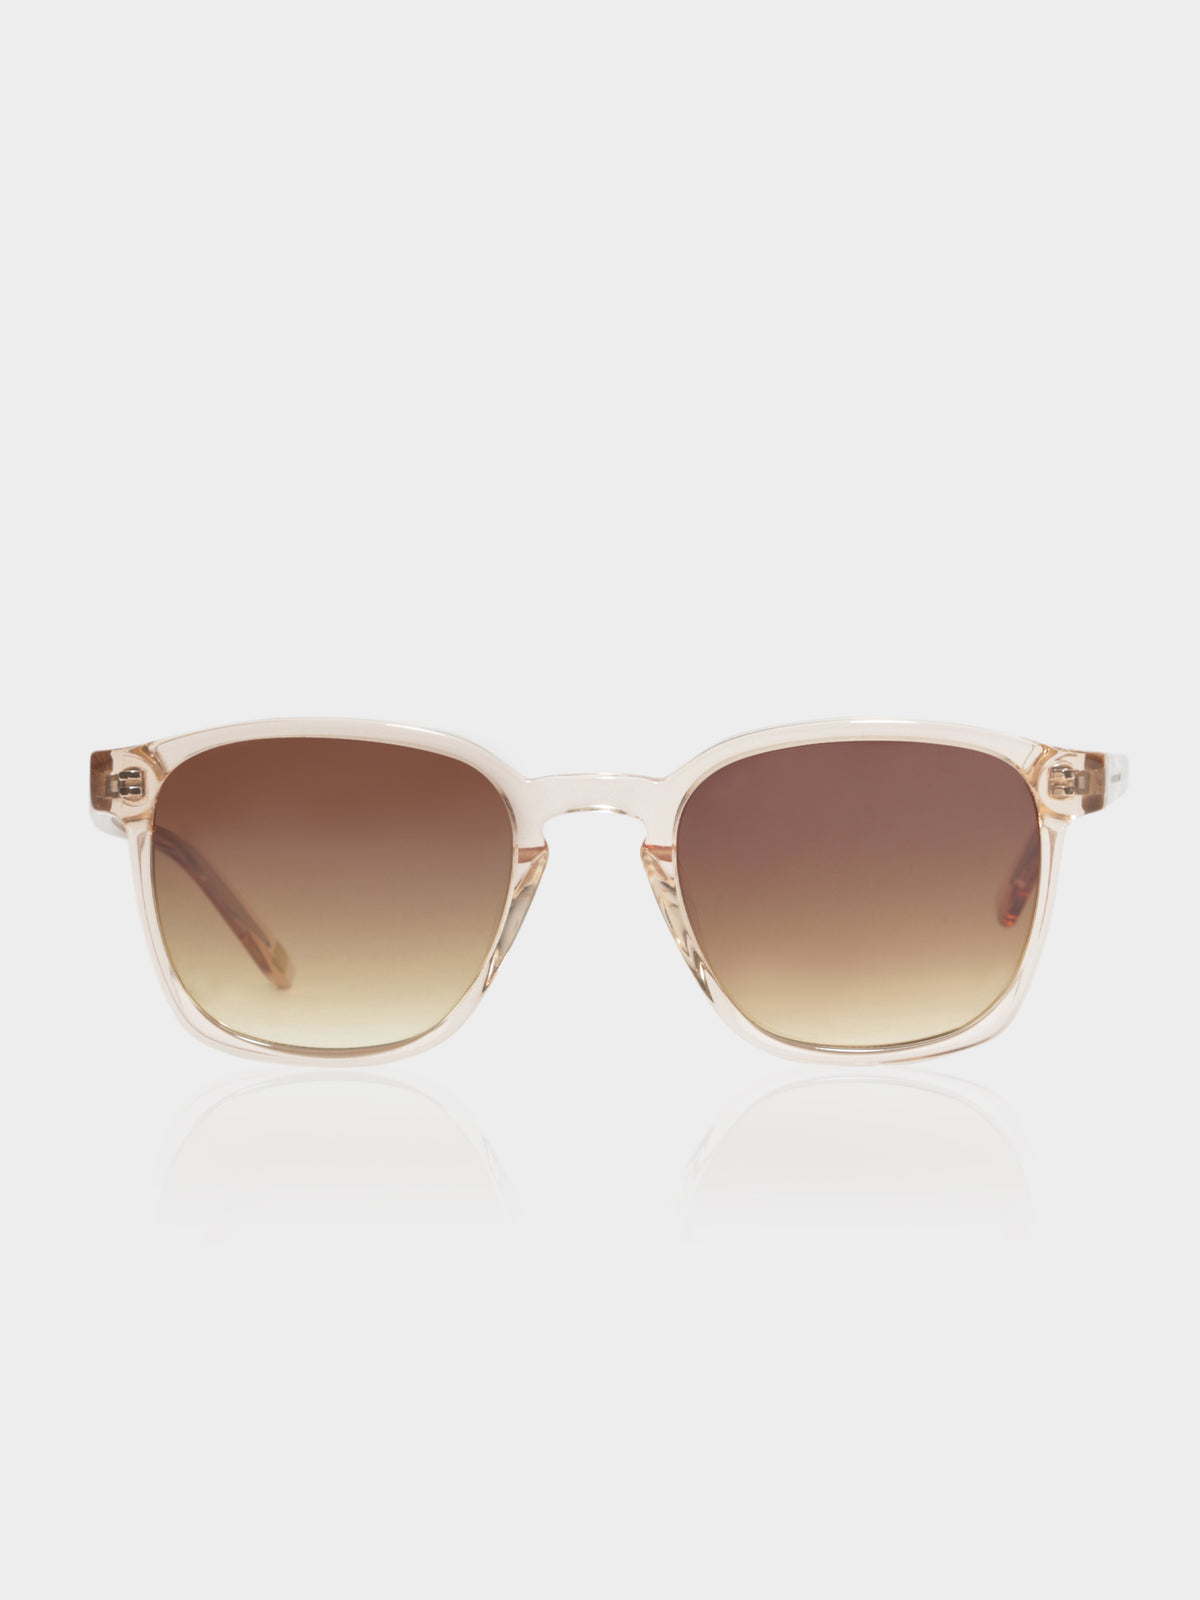 CL7820 Sunglasses in Transparent Champagne